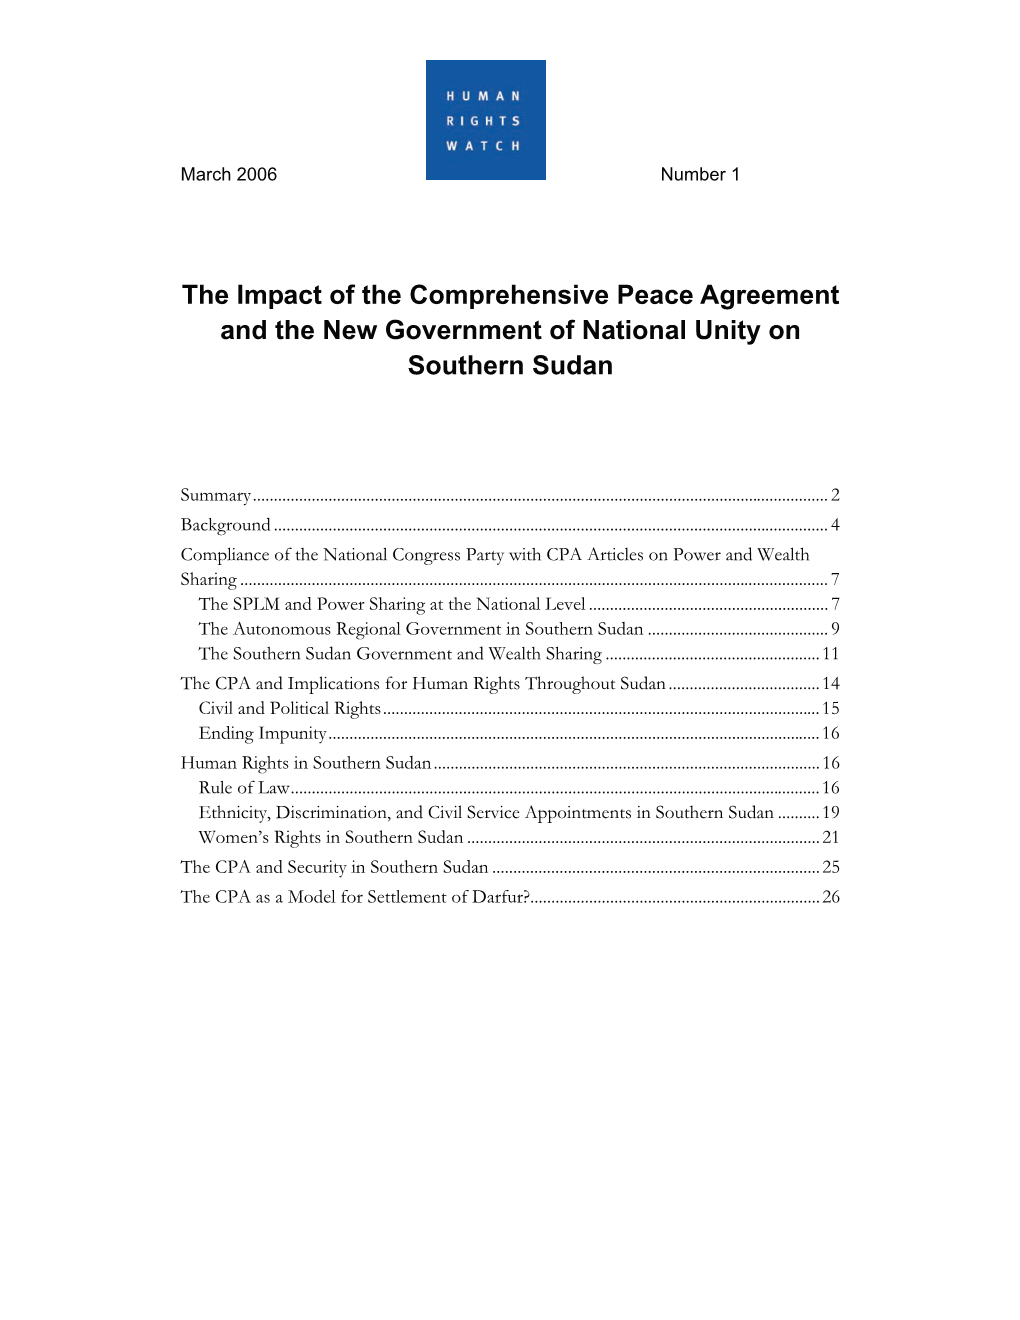 The Impact of the Comprehensive Peace Agreement and the New Government of National Unity on Southern Sudan